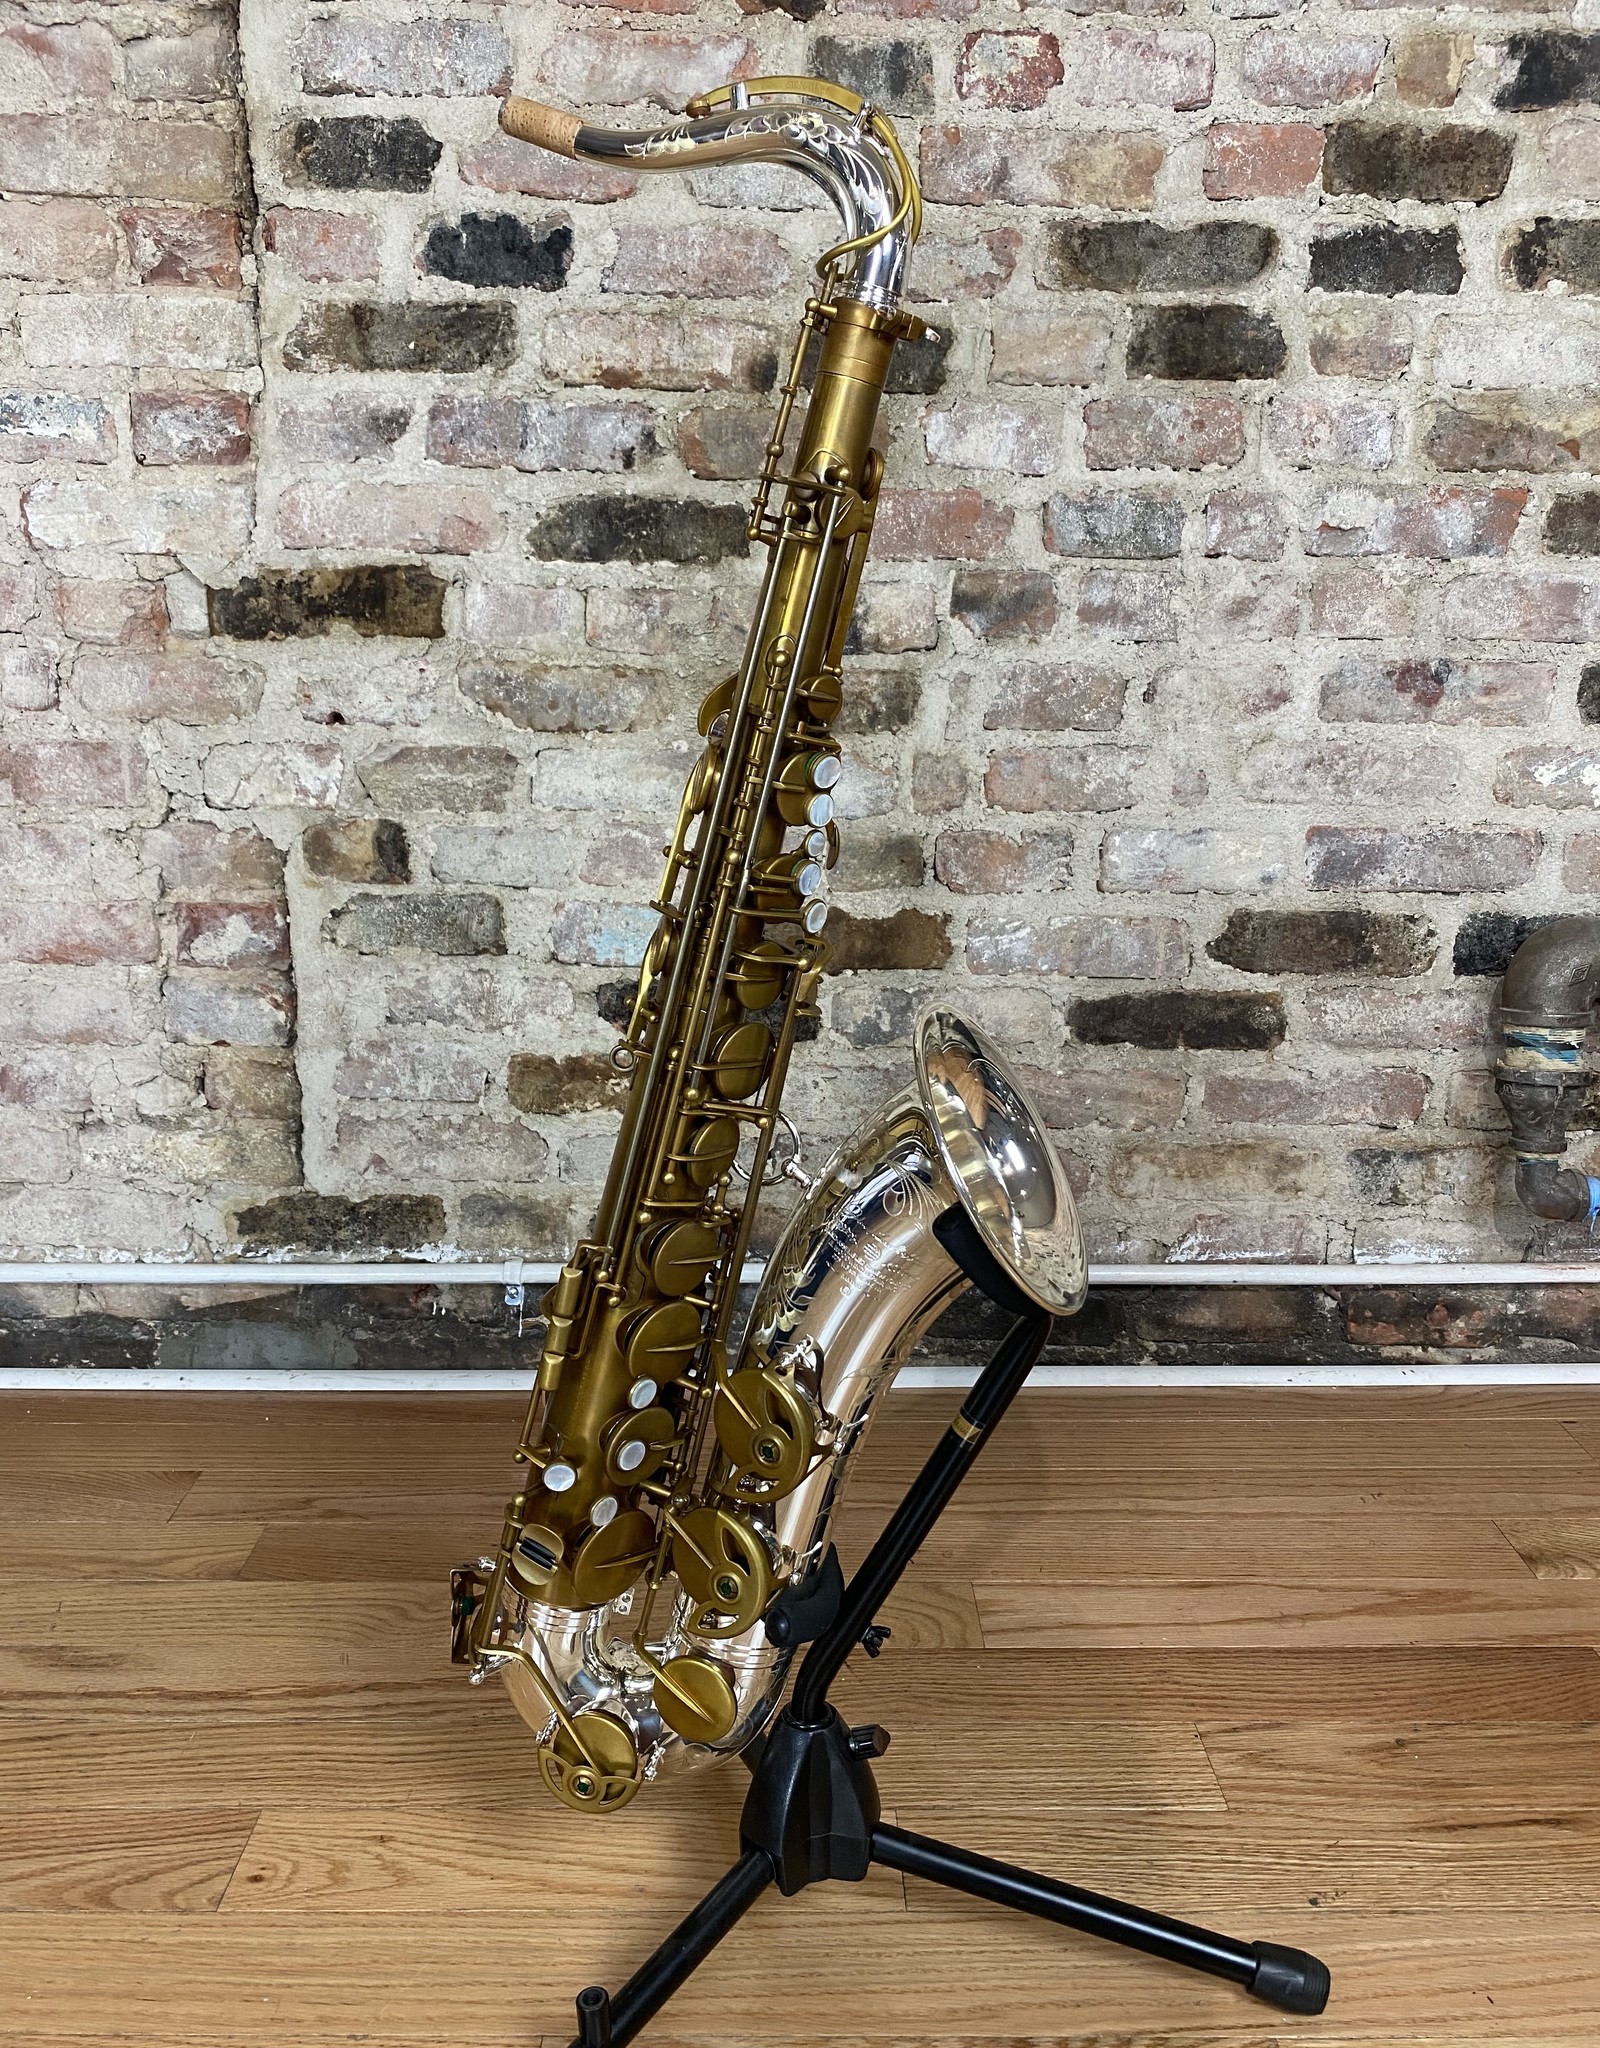 JL Woodwinds Artist Edition New York Signature Professional Tenor Saxophone Silver Bell Silver Neck Unlacquered Body No high F# *LIMITED PRODUCTION*